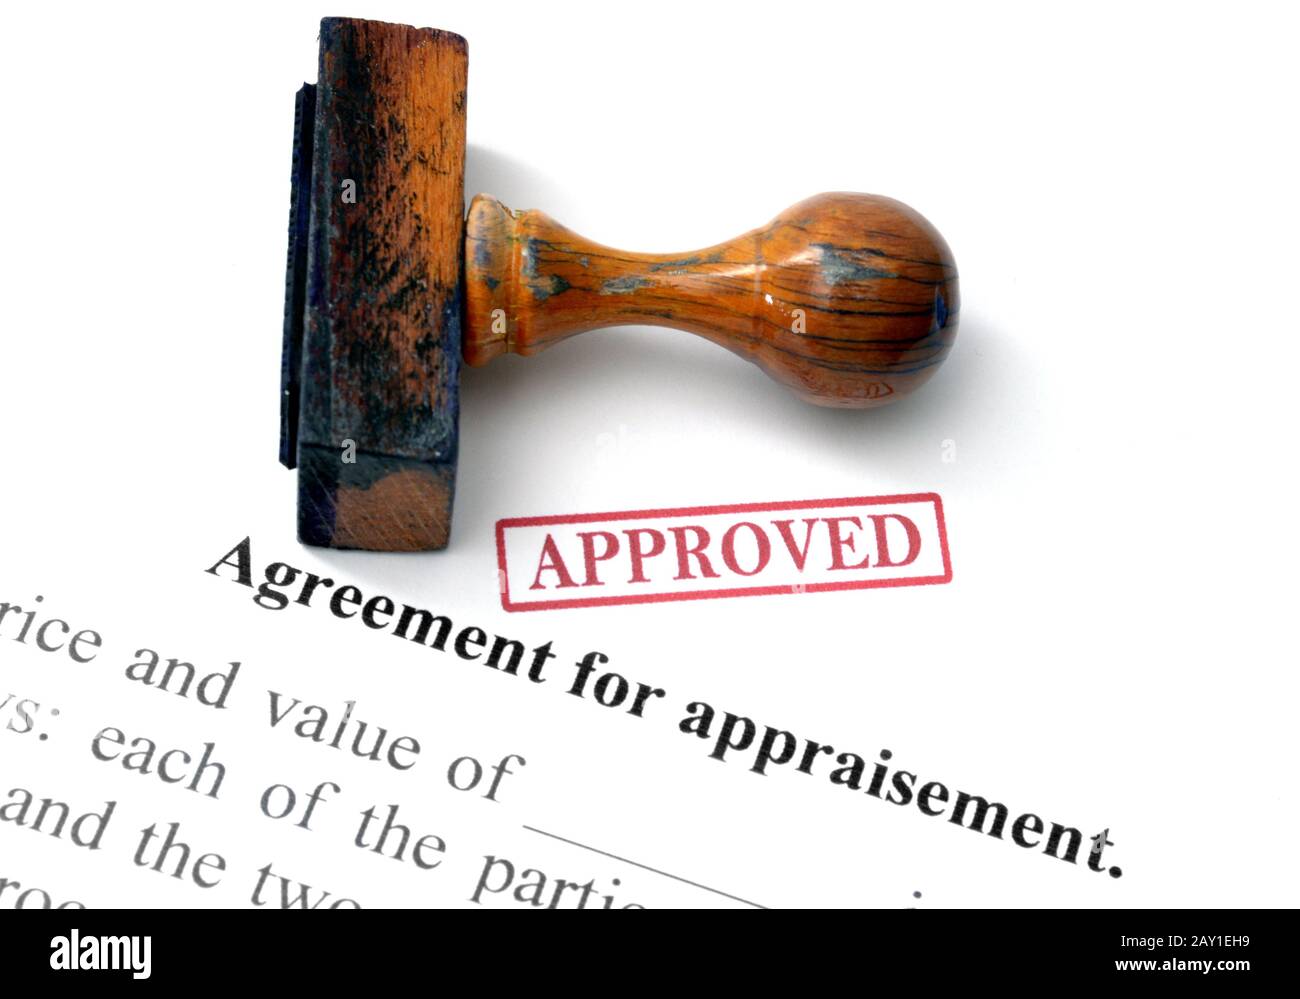 Agreement for appraisement Stock Photo